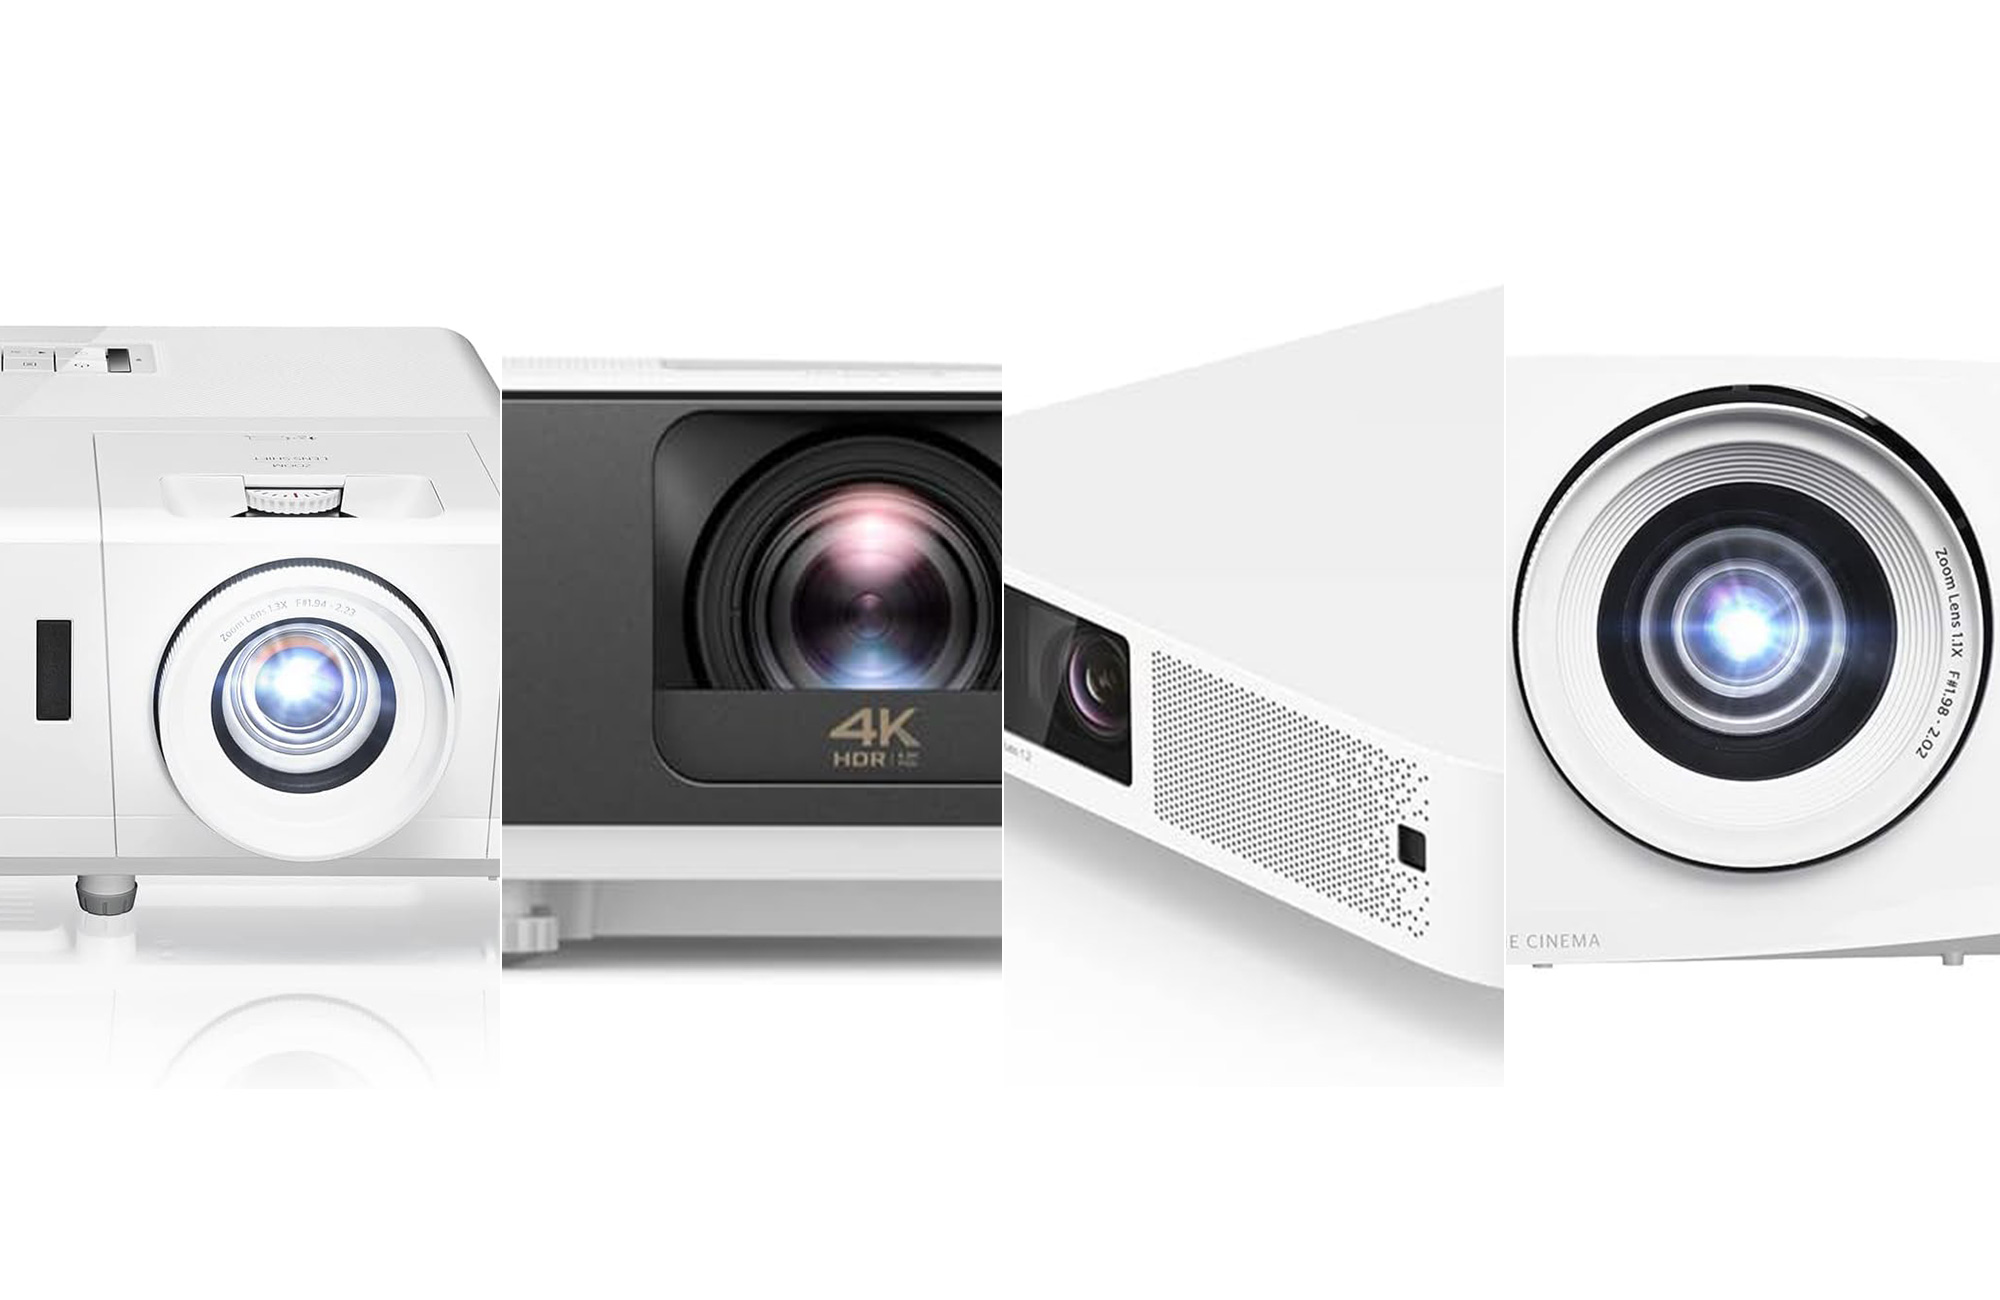 Are Projectors Good for Gaming?